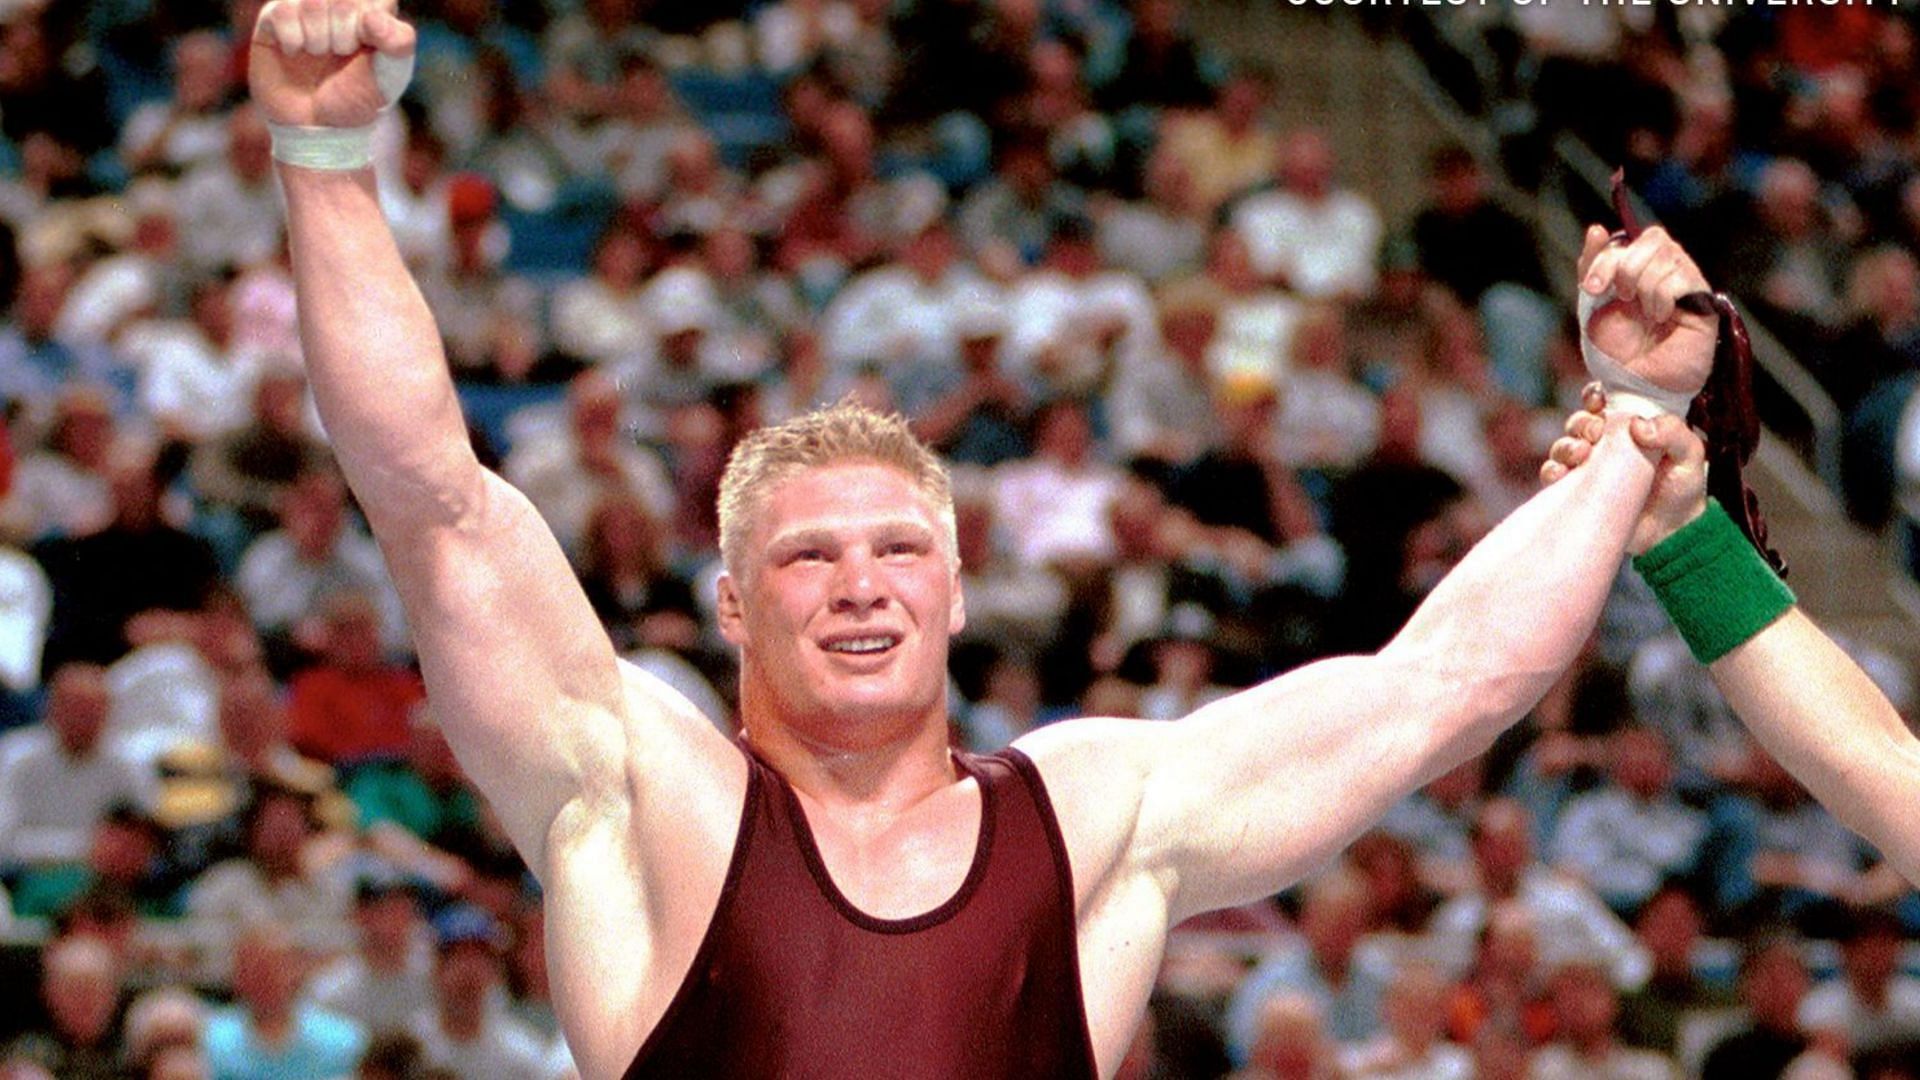 Brock Lesnar worked in a construction company to pay his rent during his university days